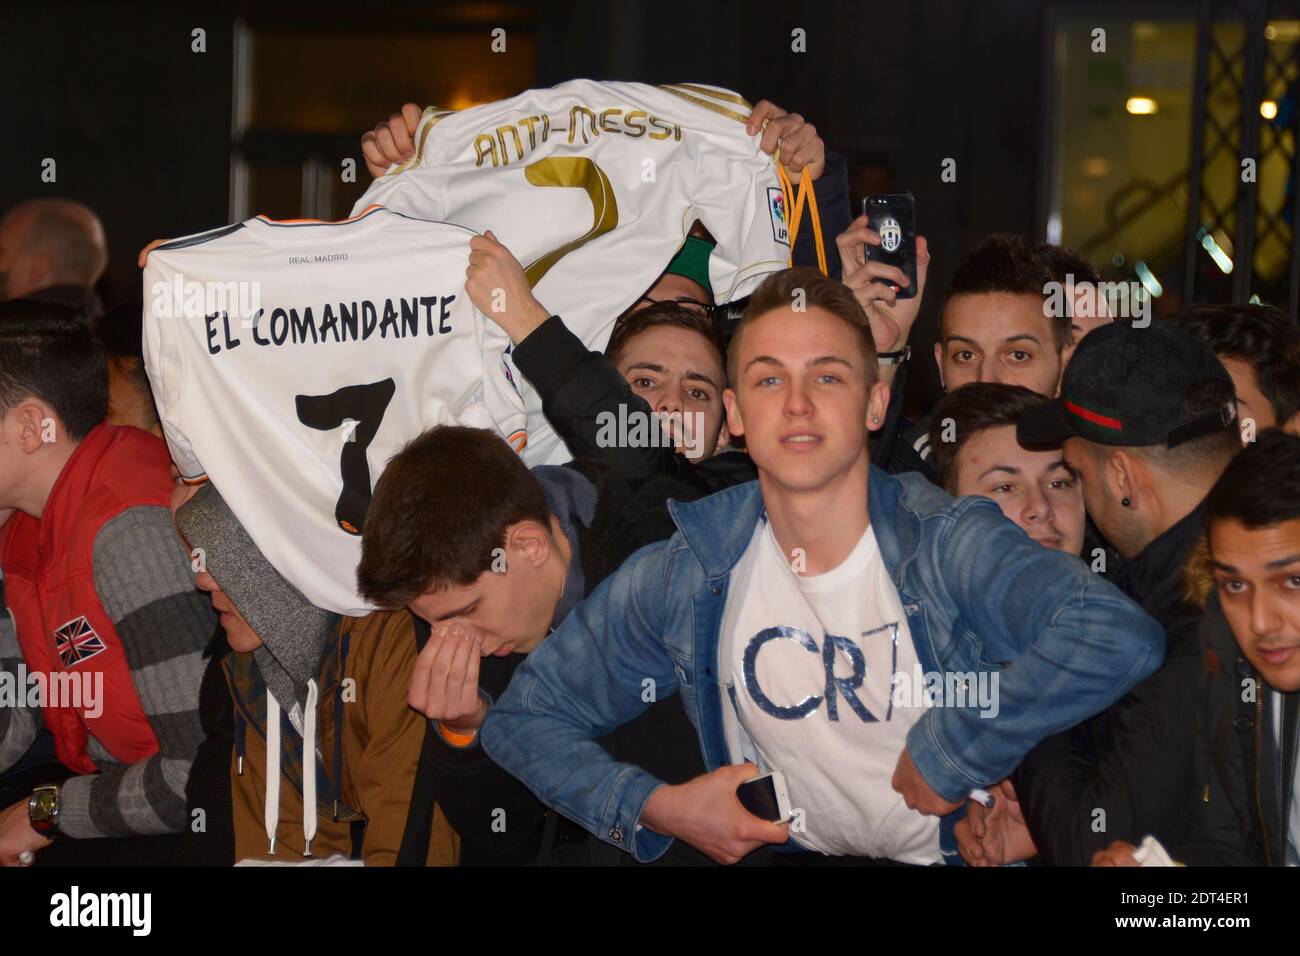 Cristiano Ronaldo fans during a photo call prior to the FIFA Ballon d'Or  2013 gala at the Kongresshalle in Zurich, Switzerland, on January 13, 2014.  Photo by Henri Szwarc/ABACAPRESS.COM Stock Photo -